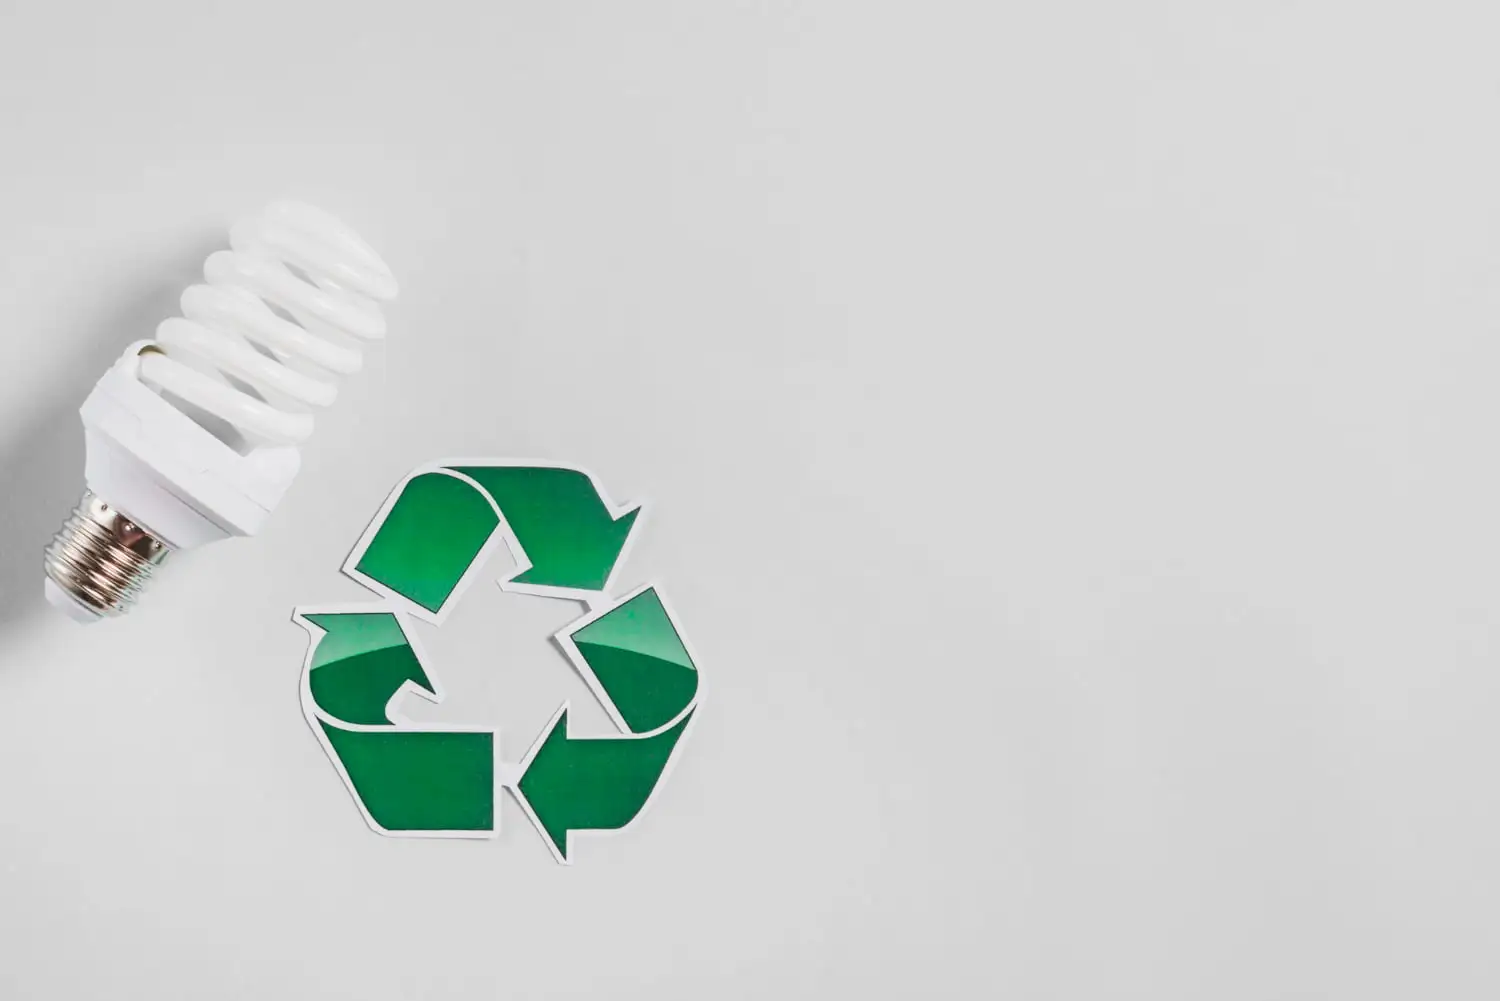 LED Bulb Recycling and Disposal